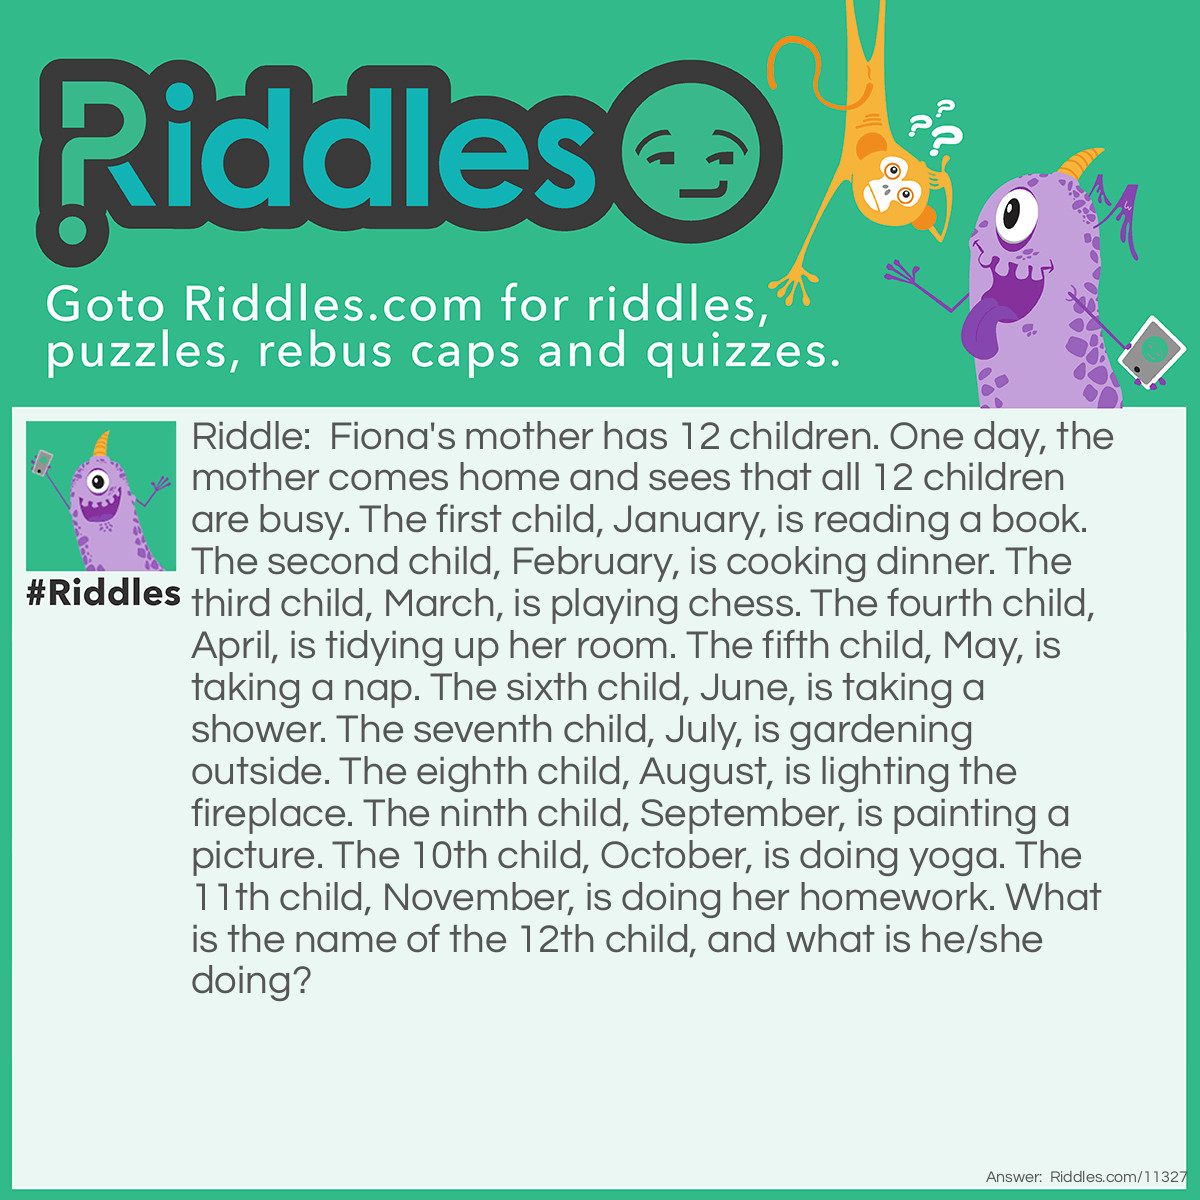 Riddle: Fiona's mother has 12 children. One day, the mother comes home and sees that all 12 children are busy. The first child, January, is reading a book. The second child, February, is cooking dinner. The third child, March, is playing chess. The fourth child, April, is tidying up her room. The fifth child, May, is taking a nap. The sixth child, June, is taking a shower. The seventh child, July, is gardening outside. The eighth child, August, is lighting the fireplace. The ninth child, September, is painting a picture. The 10th child, October, is doing yoga. The 11th child, November, is doing her homework. What is the name of the 12th child, and what is he/she doing? Answer: The name of the 12th child is Fiona, and she is playing chess with March. Fiona is the name of the 12th child because this is FIONA'S mother. And Fiona is playing chess with March because most of the aforementioned activities require only one person to do, except for playing chess; that activity requires two players.